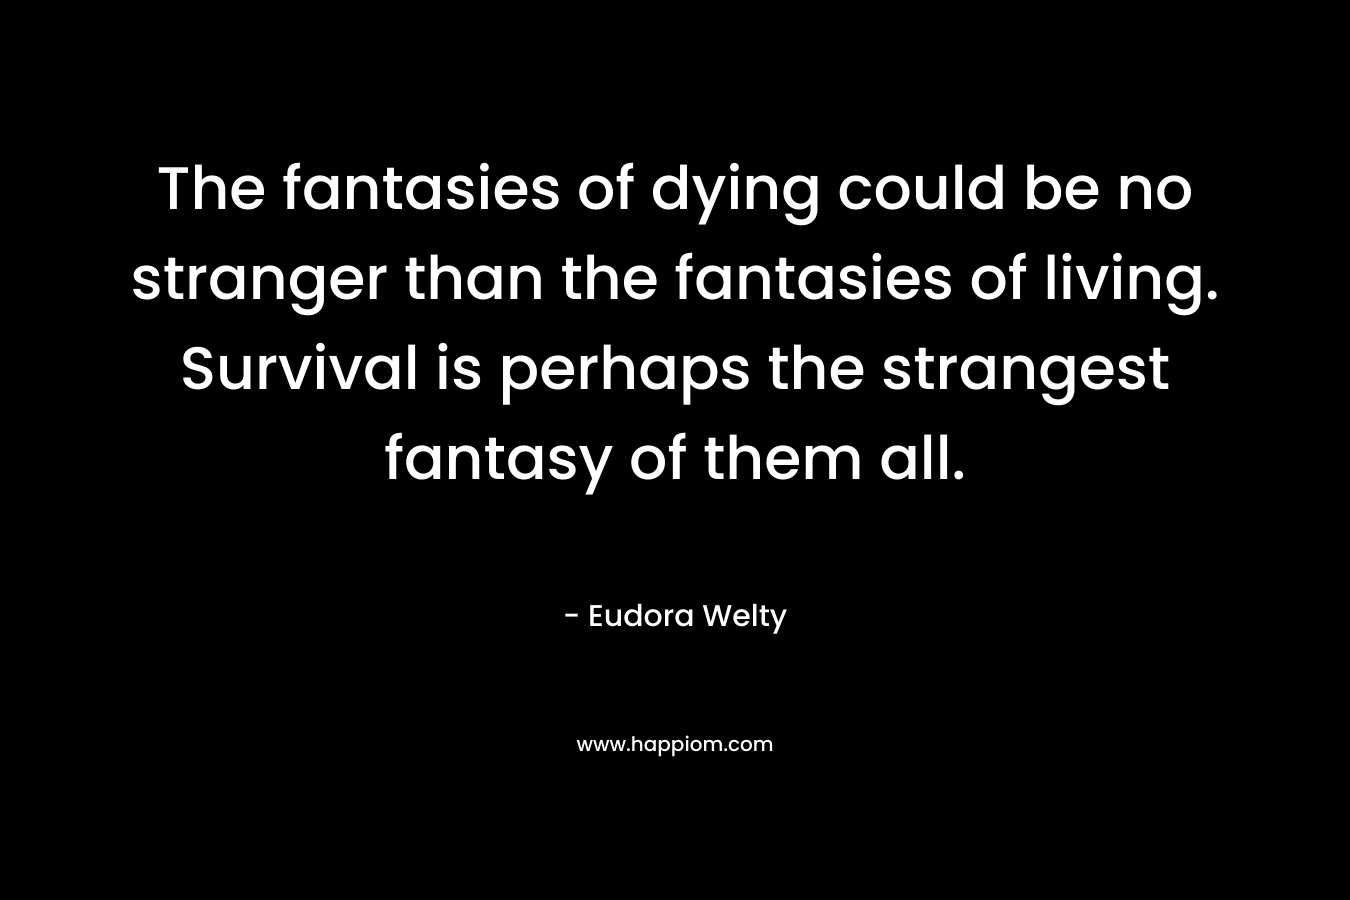 The fantasies of dying could be no stranger than the fantasies of living. Survival is perhaps the strangest fantasy of them all. – Eudora Welty